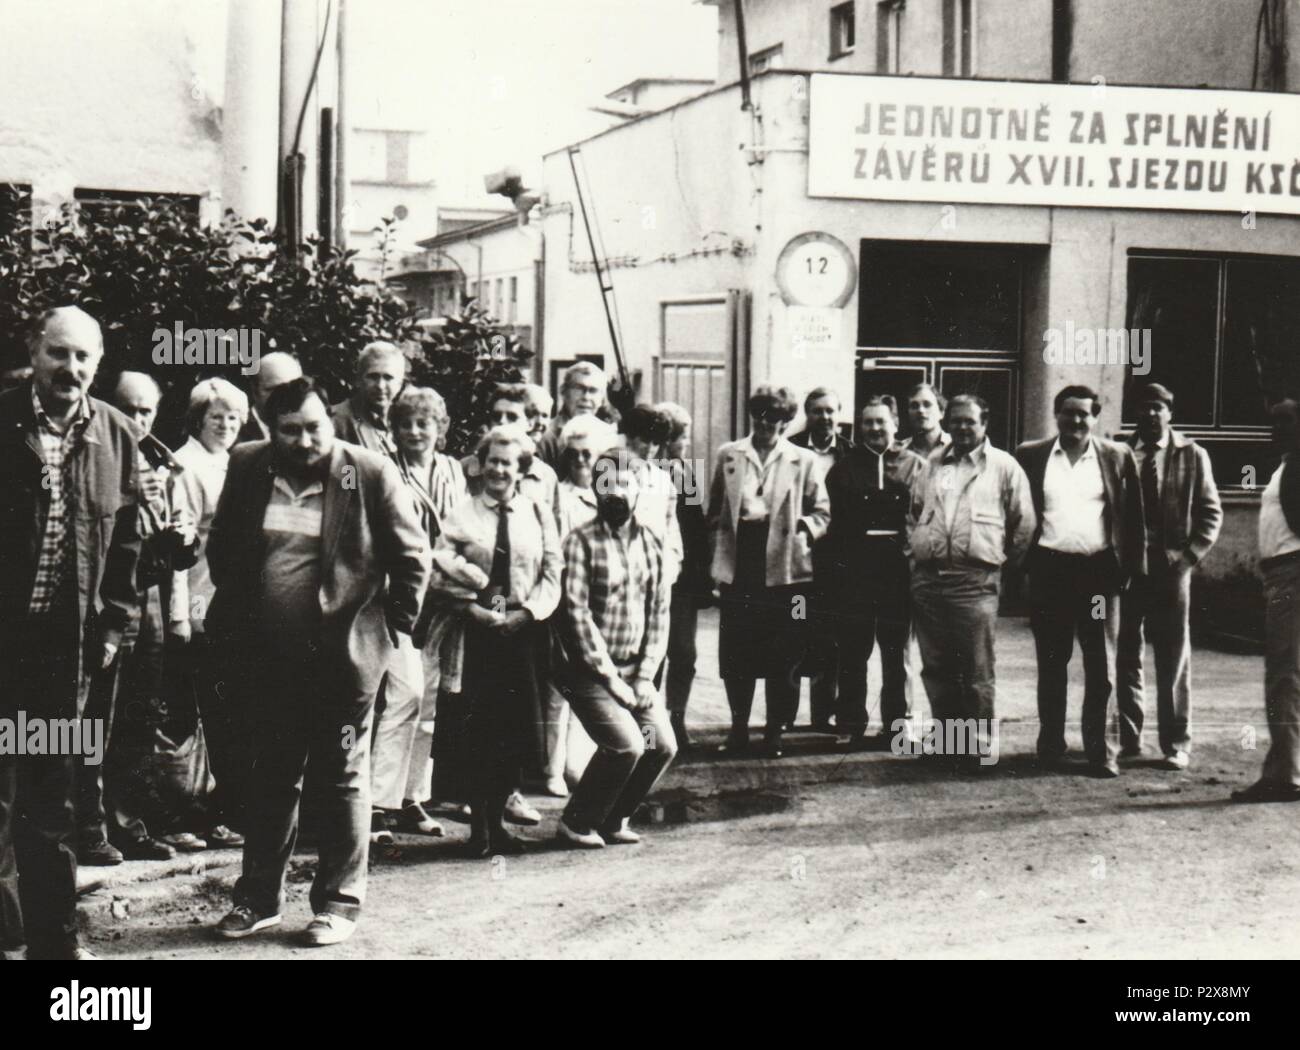 THE CZECHOSLOVAK SOCIALIST REPUBLIC - CIRCA 1970s: Vintage photo shows workers in front of factory. Photography from communist era. Retro black & white  photography Stock Photo